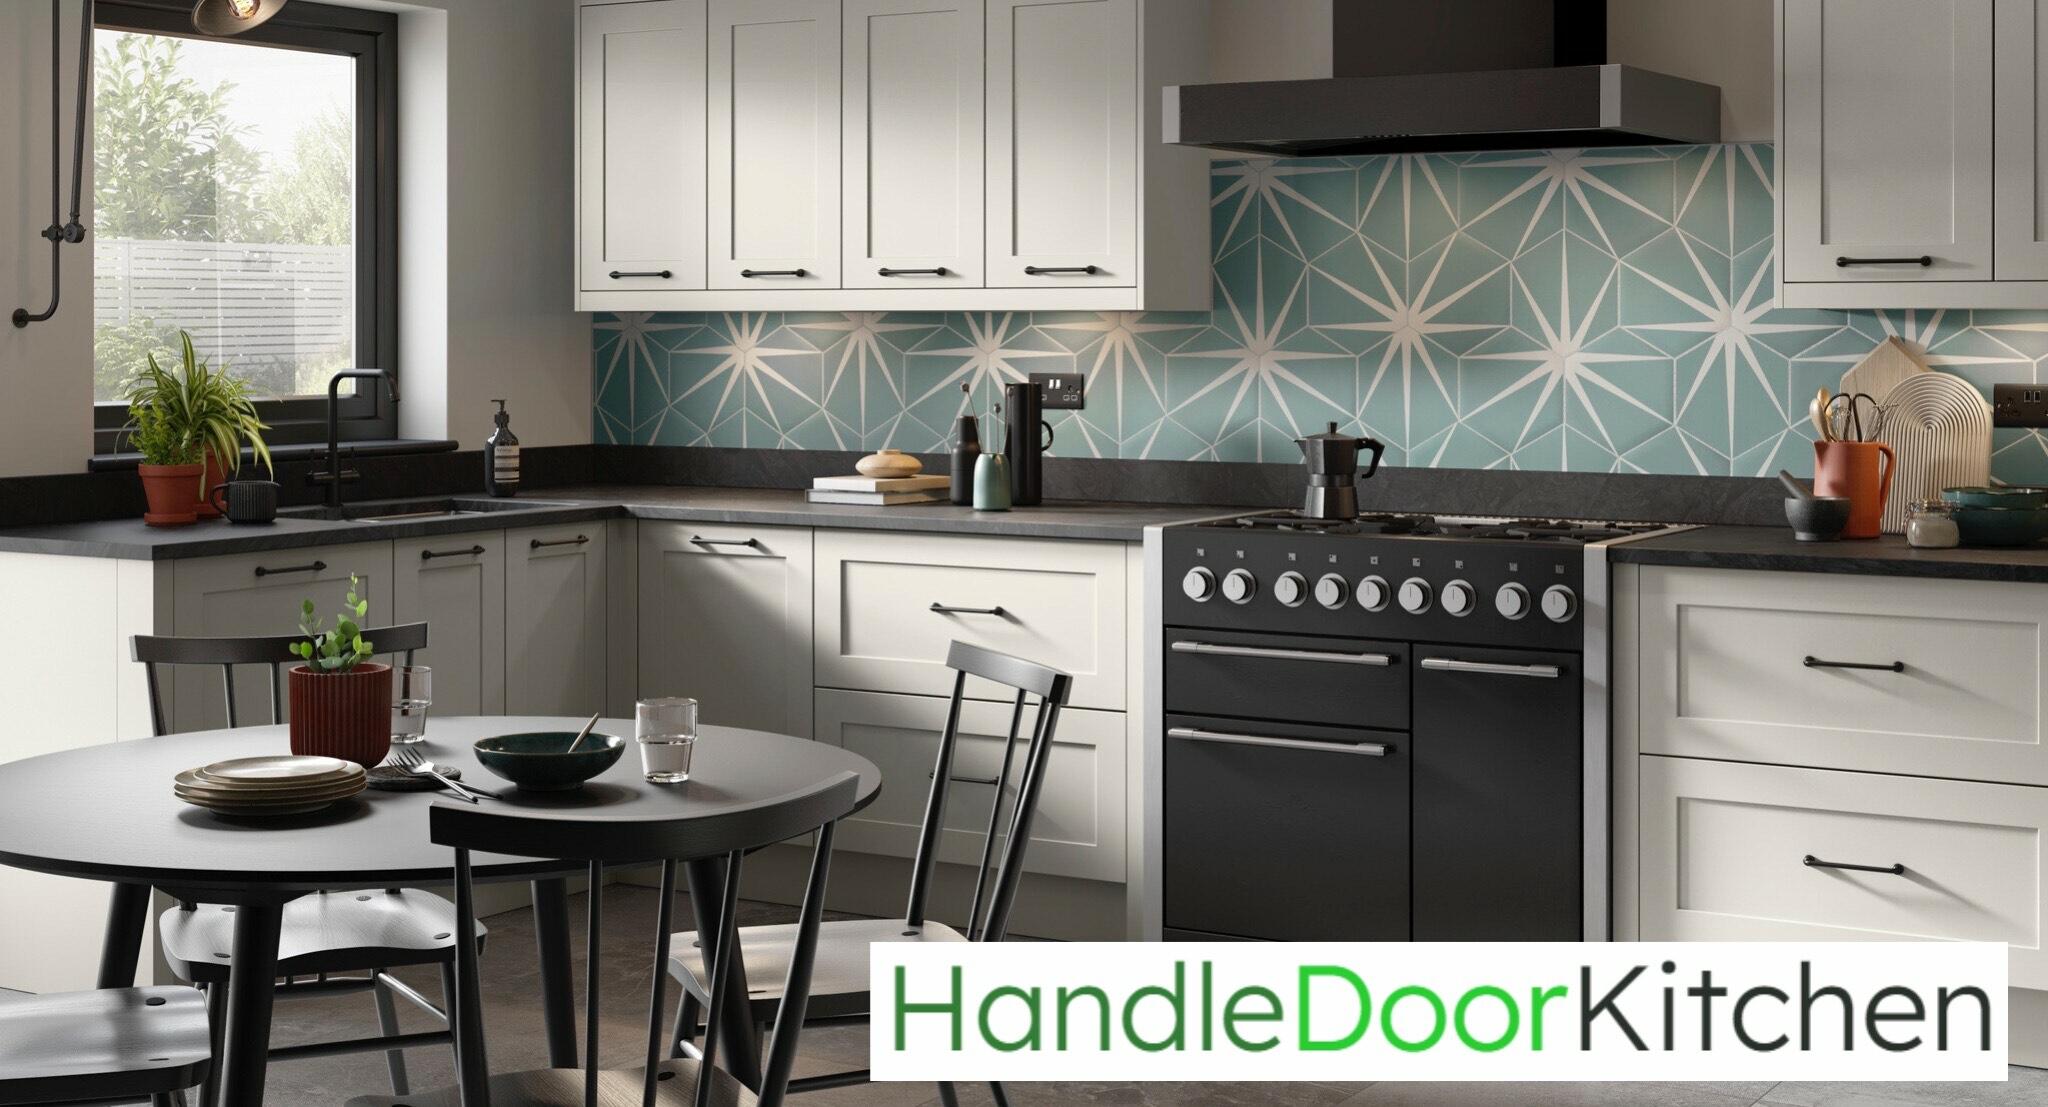 Check out our associated website for all your kitchen handle and door needs!